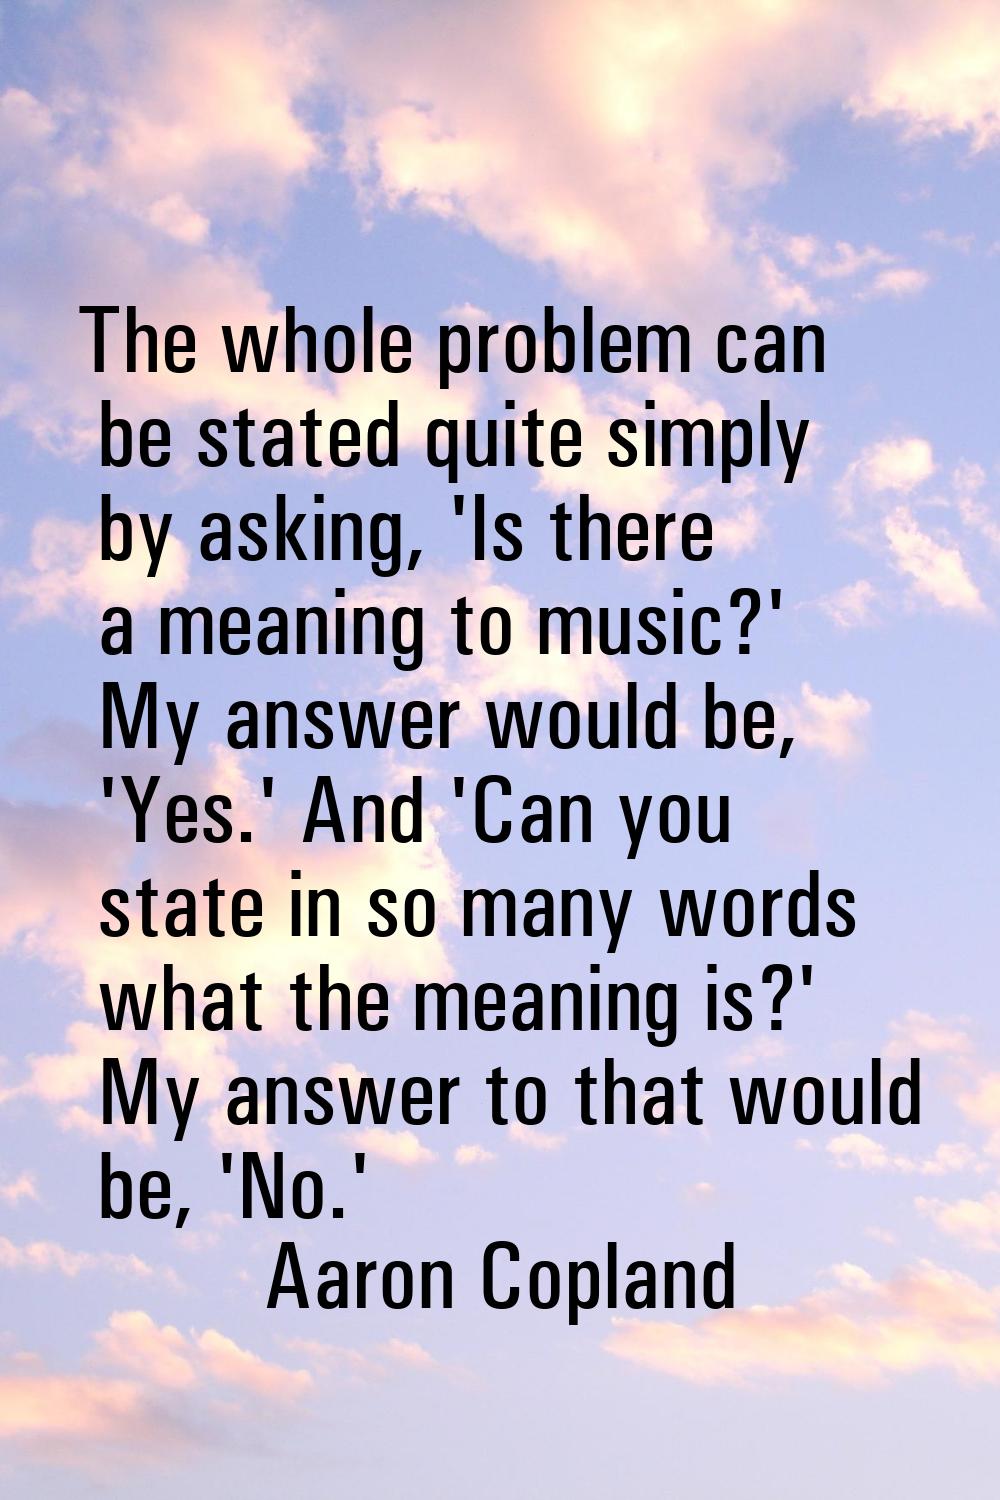 The whole problem can be stated quite simply by asking, 'Is there a meaning to music?' My answer wo